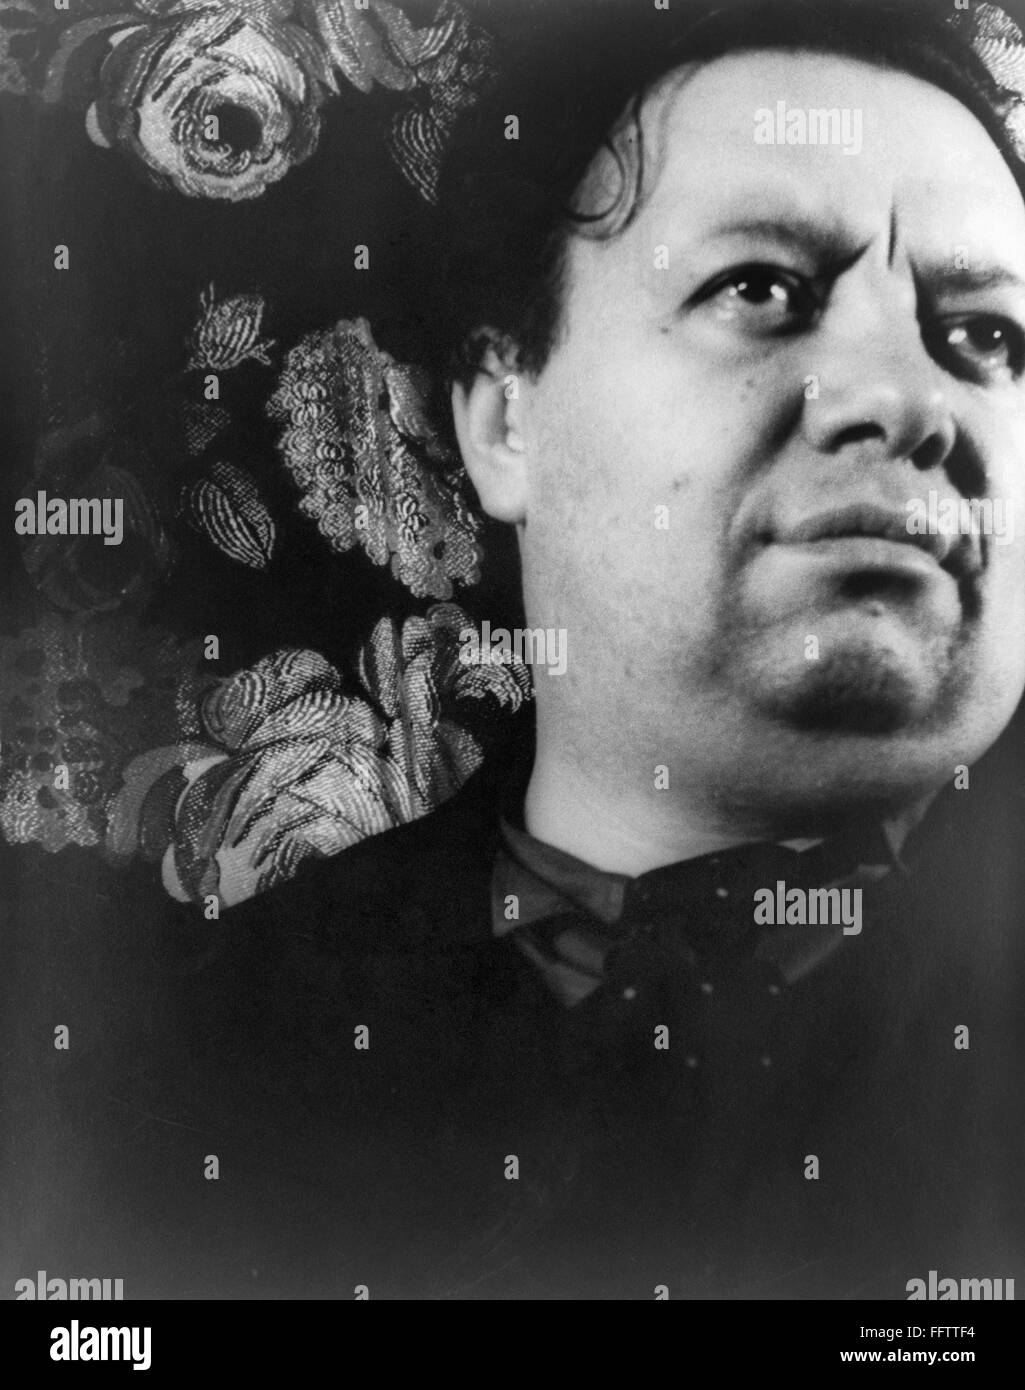 DIEGO RIVERA (1886-1957). /nMexican painter. Photographed by Carl Van Vechten, 1932. Stock Photo